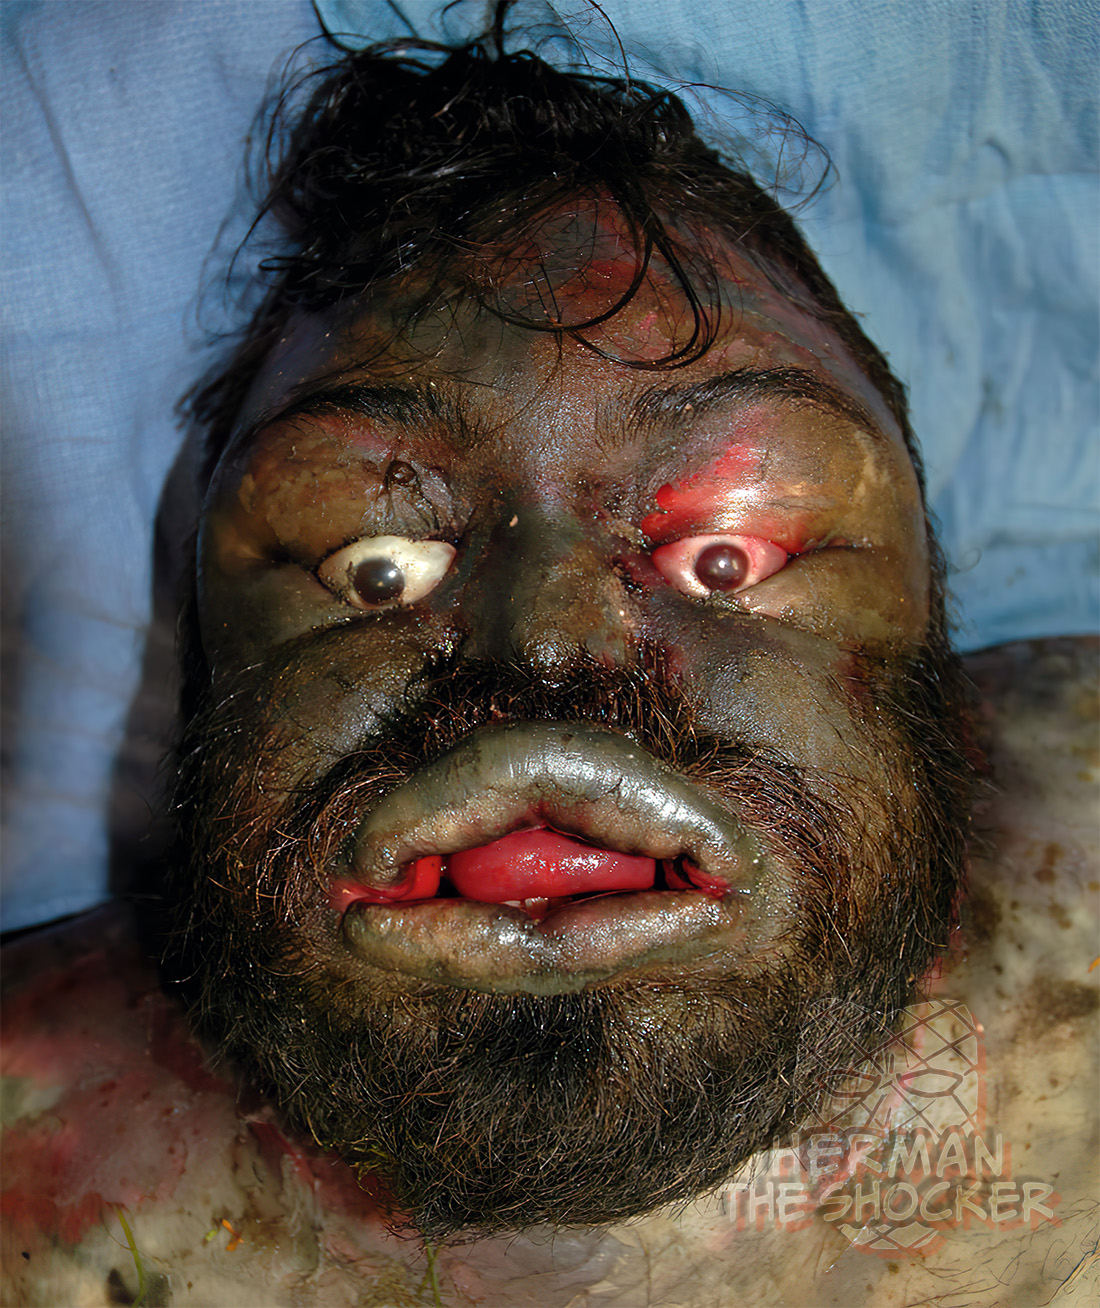 Bulging of the eyes, lips and face, with protrusion of the tongue, all related to decomposition